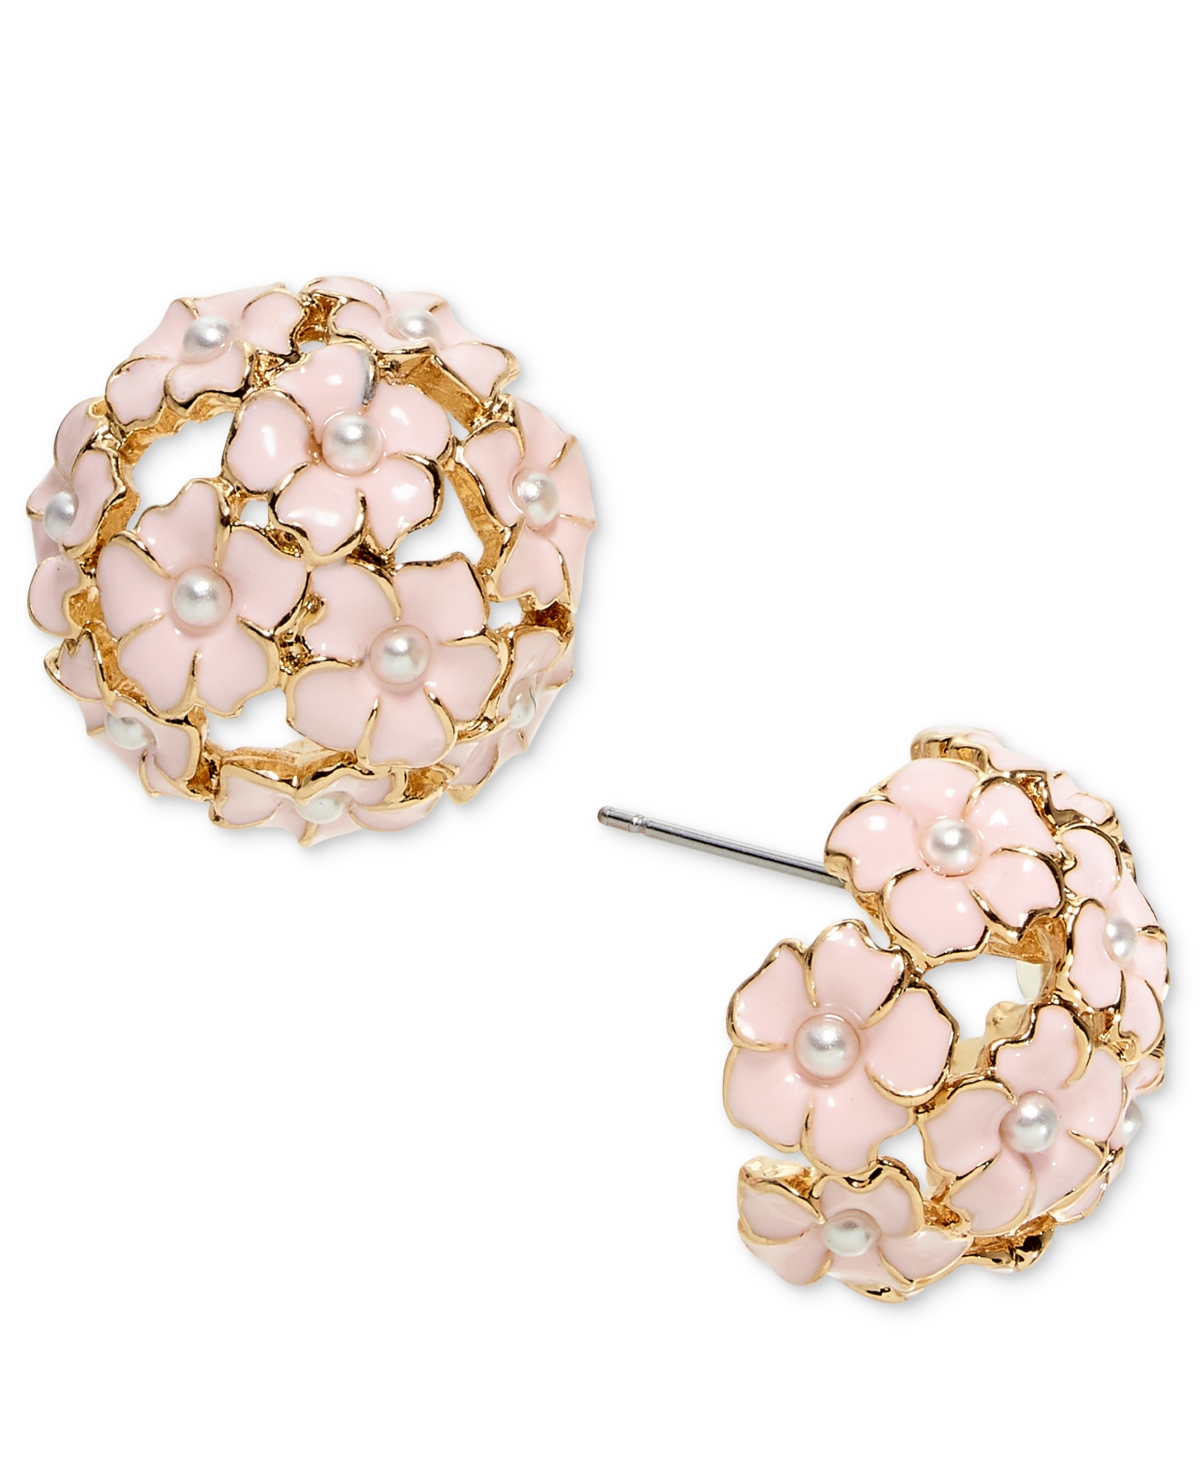 Gold-Tone Imitation Pearl & Color Flower Cluster Stud Earrings, Created for Macy's - Gold